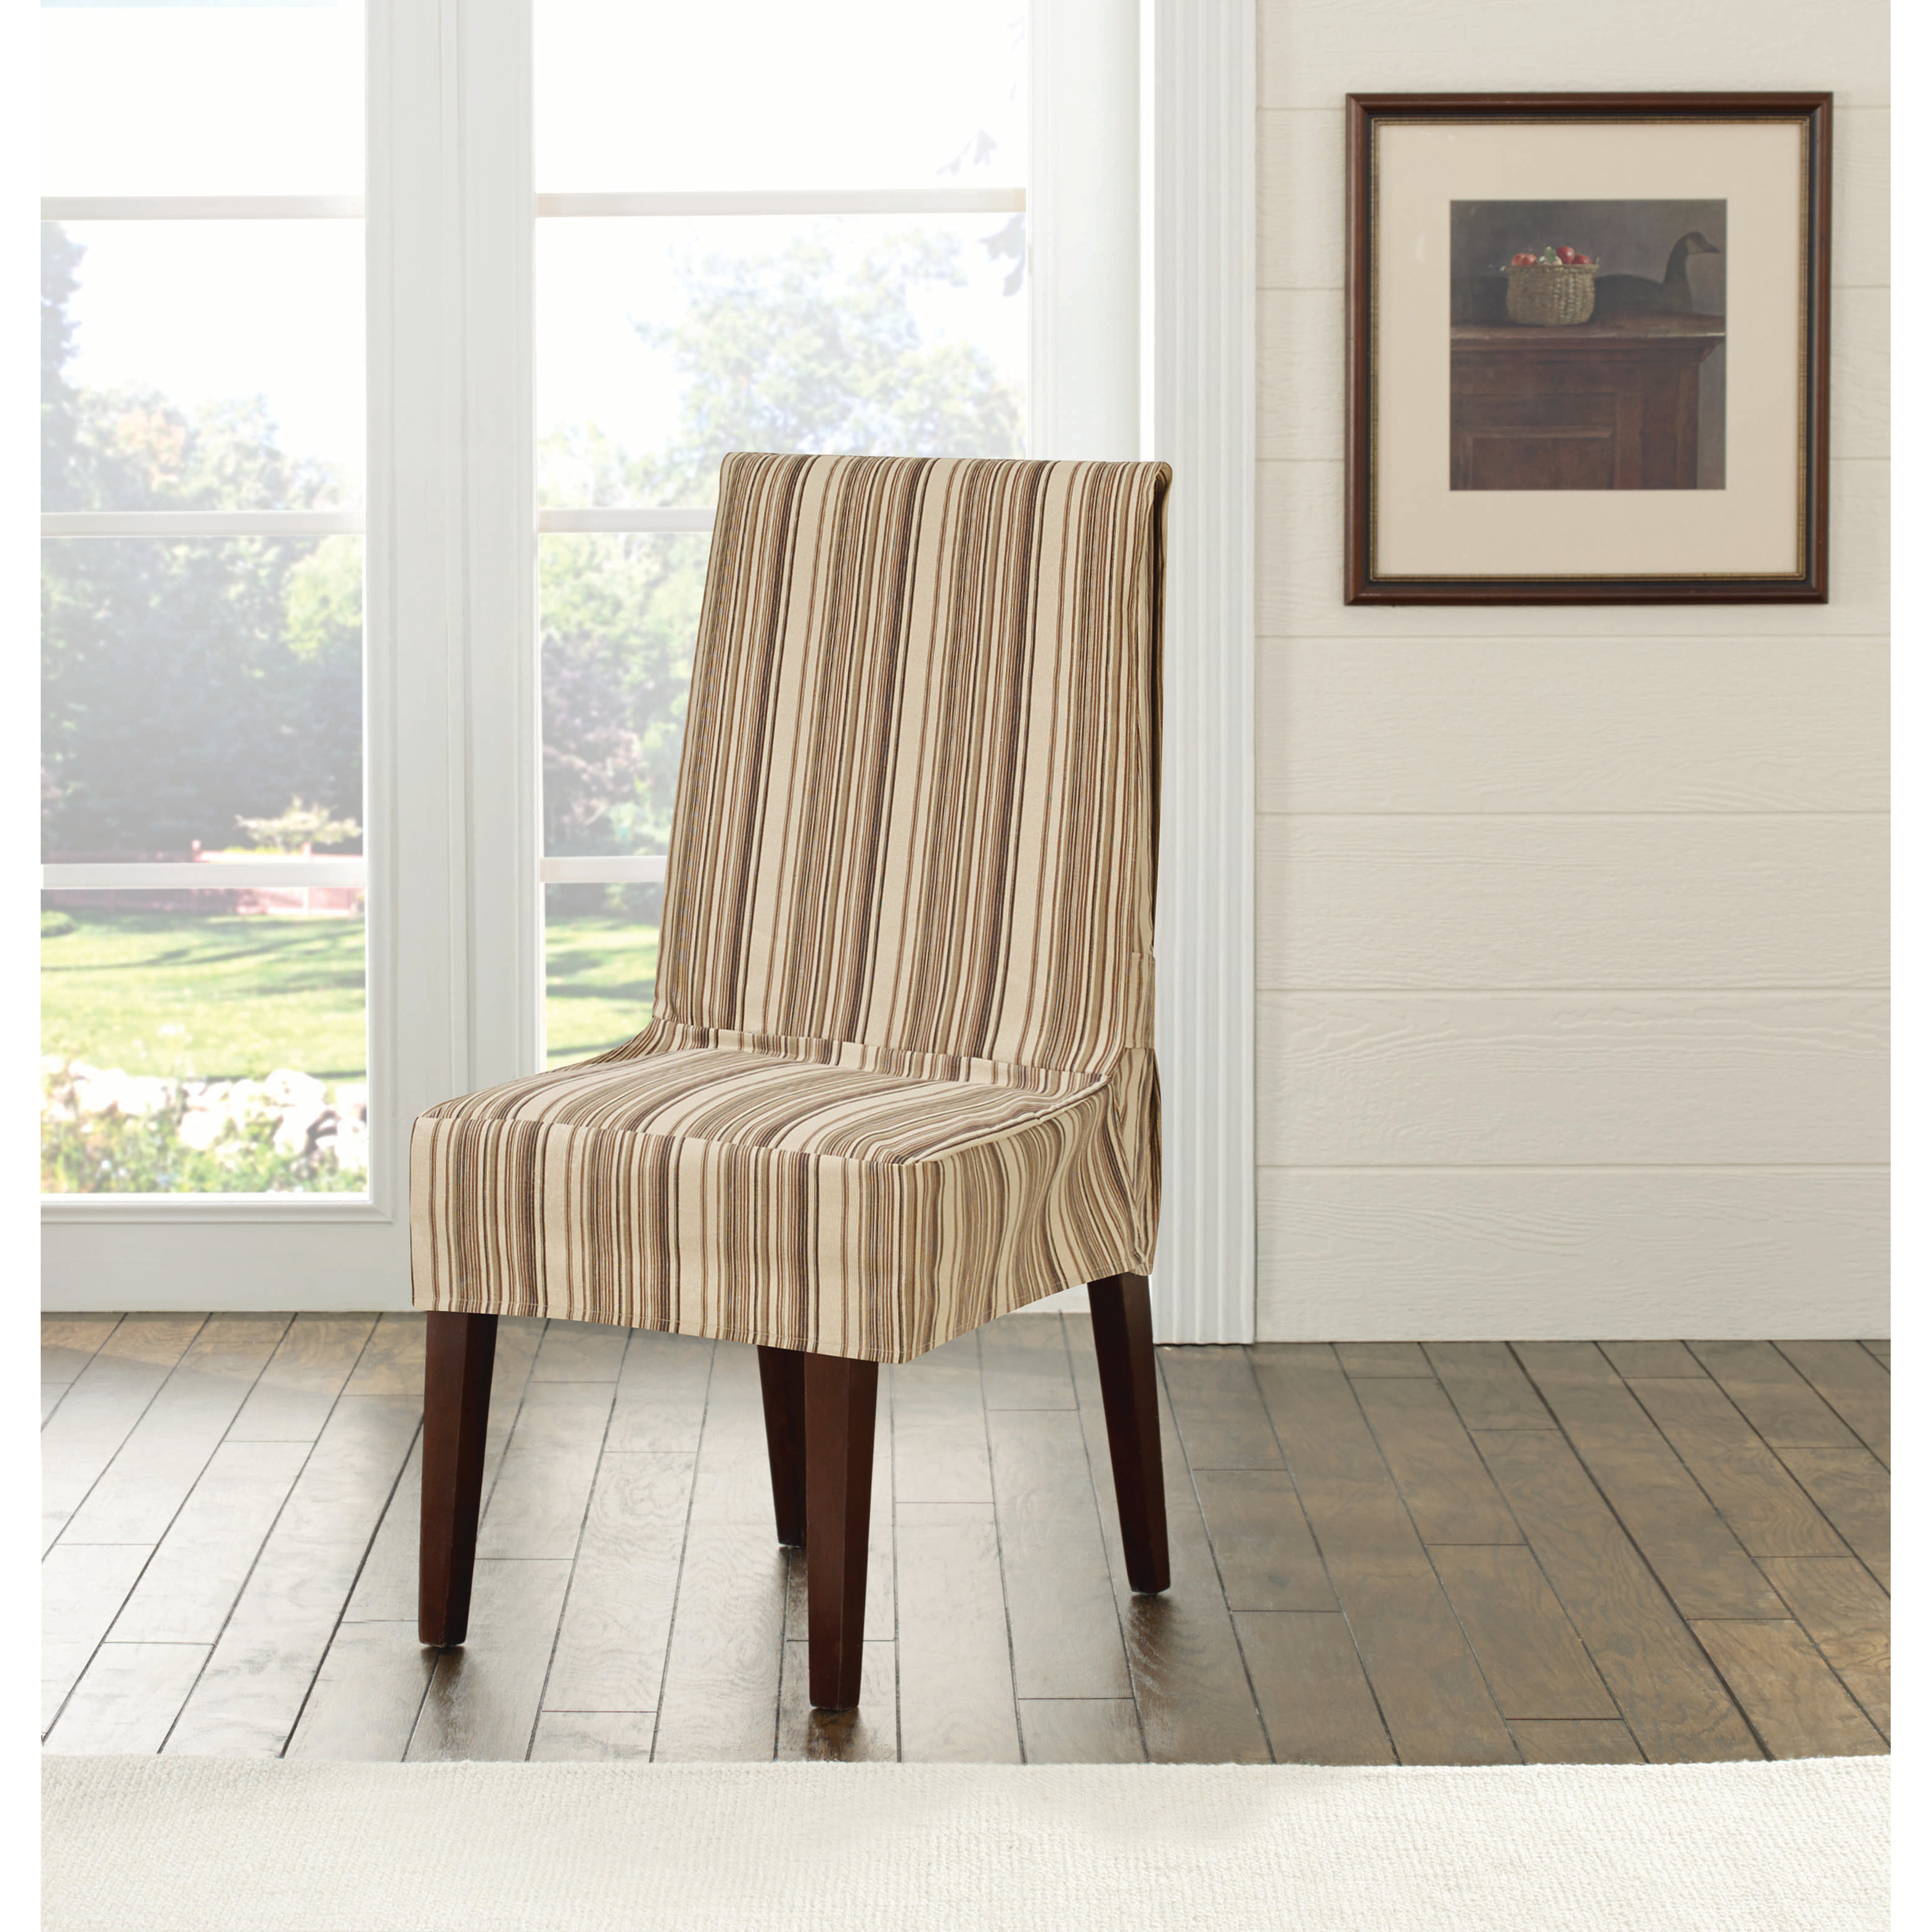 Sure Fit Harbor Stripe Dining Chair Slipcover & Reviews | Wayfair